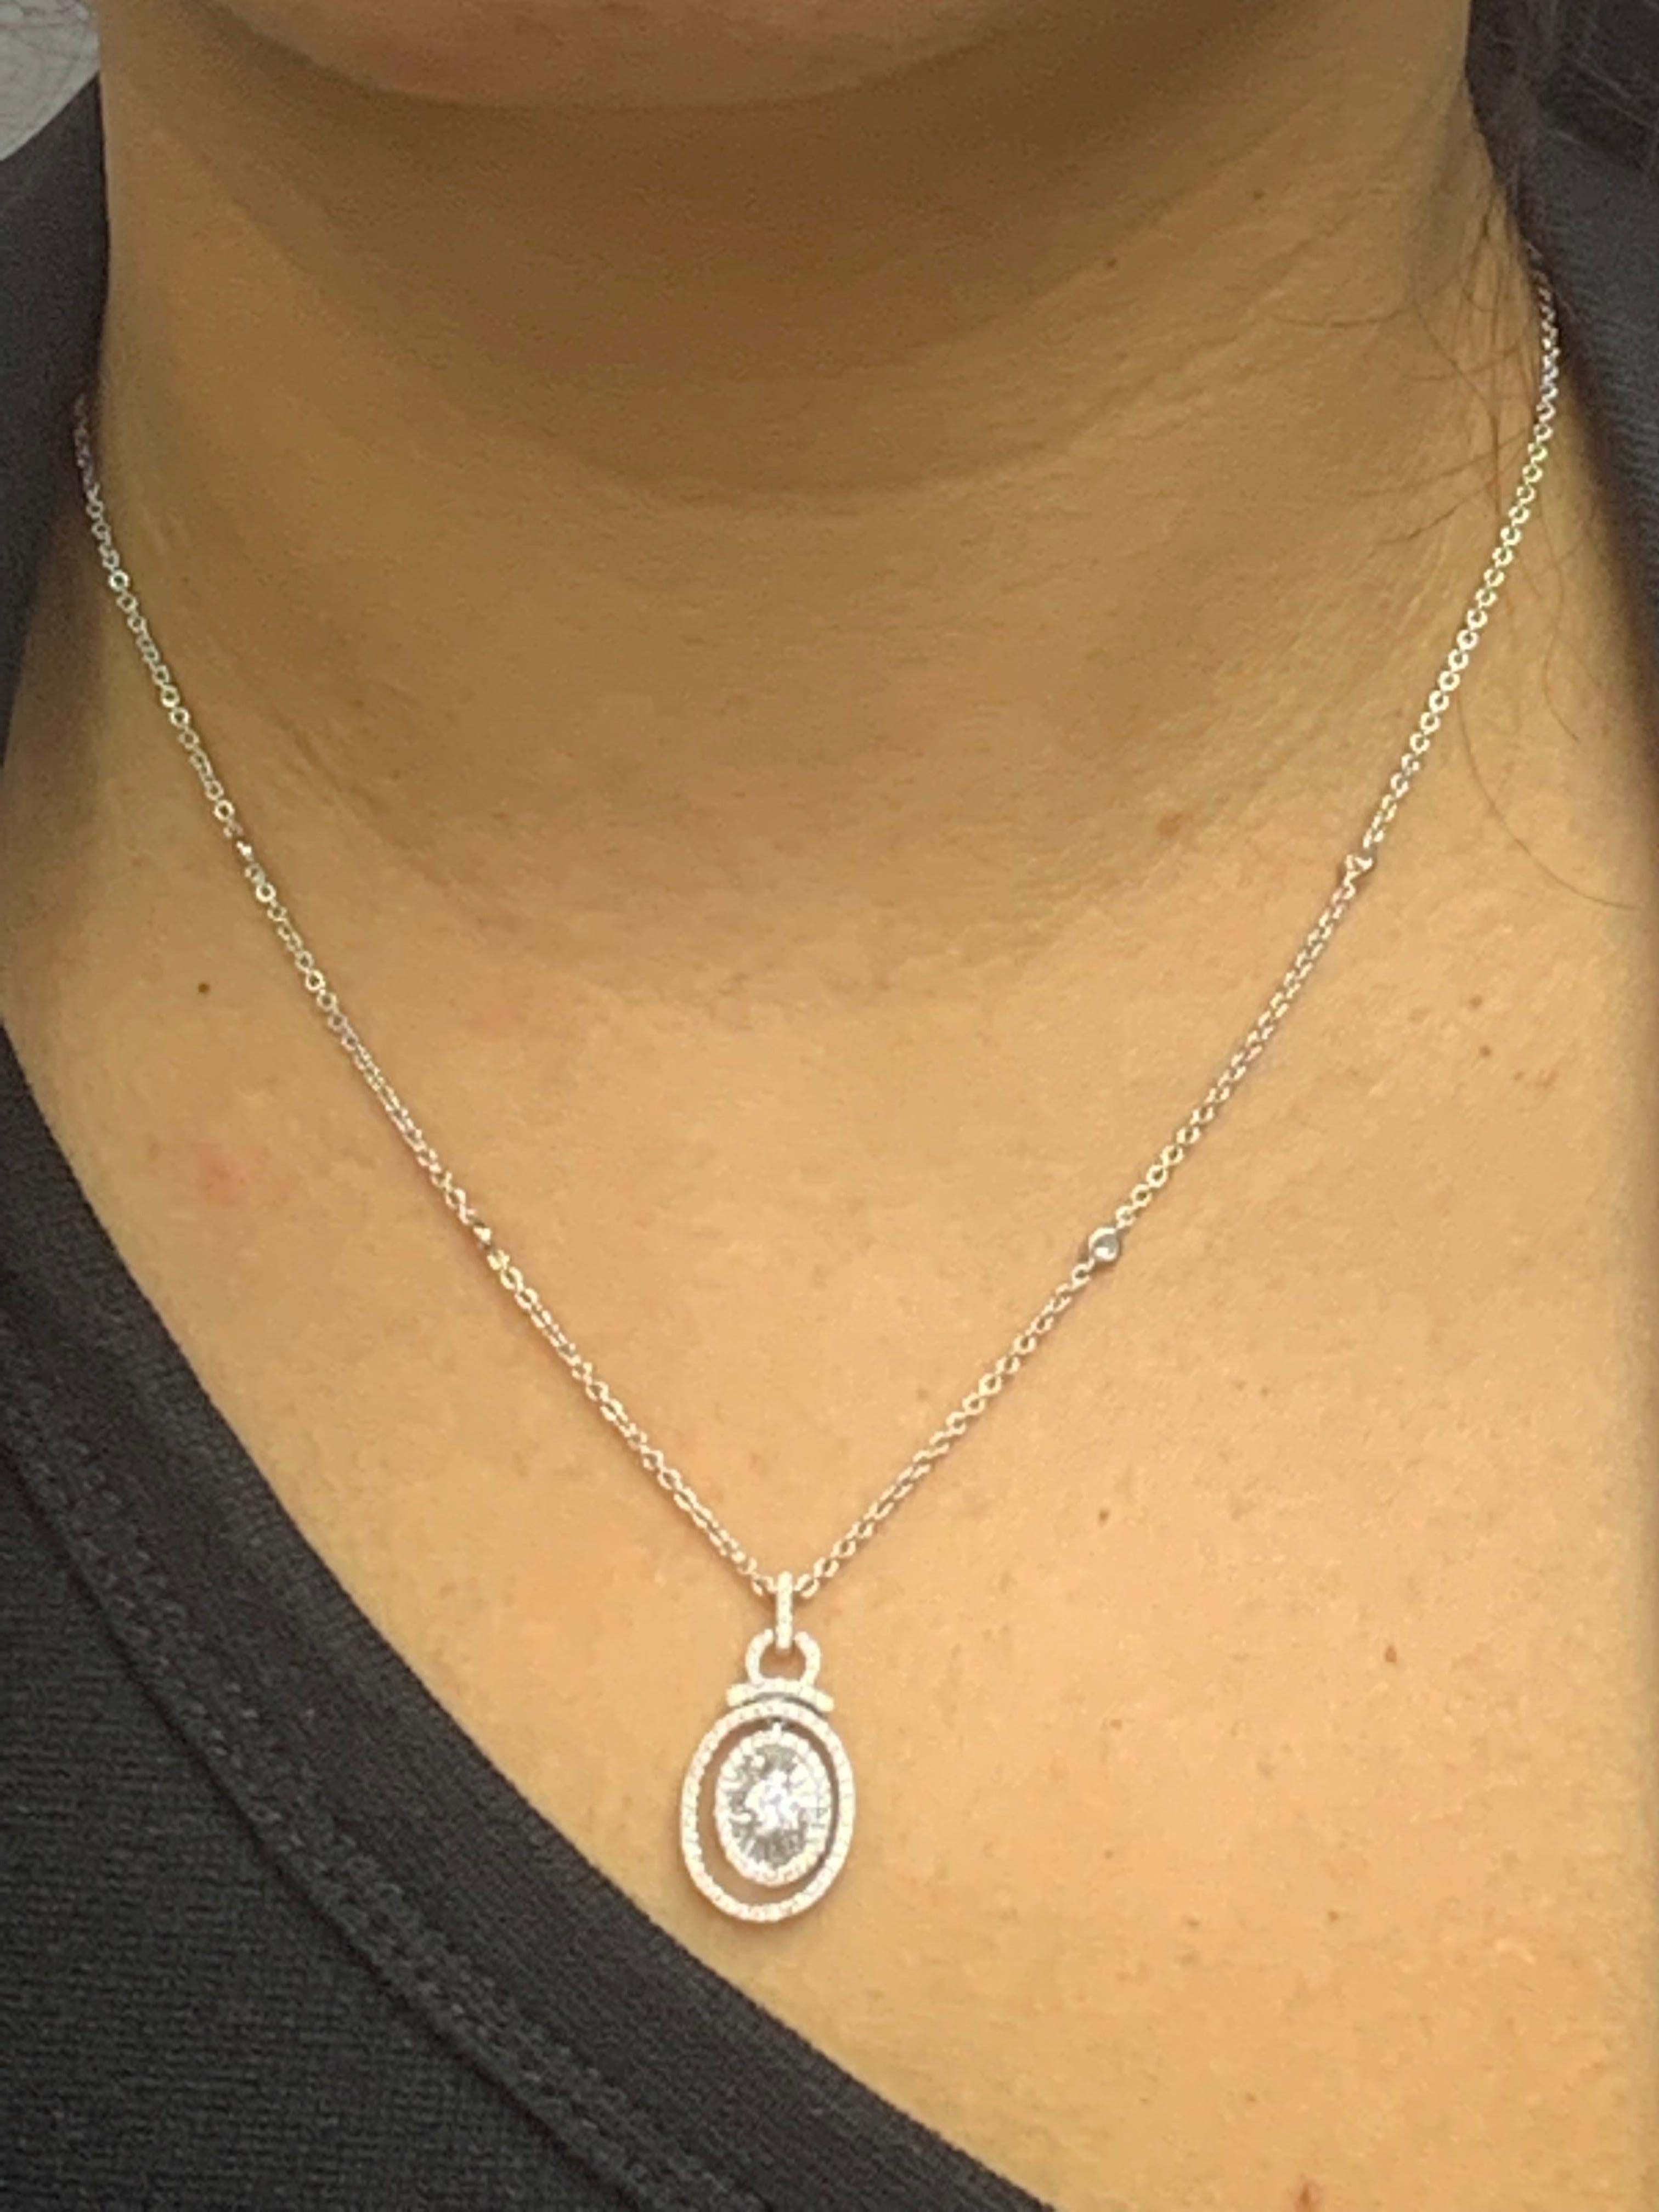 A simple and classic pendant necklace showcasing mixed cut diamonds, 86 round diamonds weigh 0.45 carat, 19 baguette diamonds weigh 0.25 carat and 1 brilliant cut diamond in the center weighs 0.17 carat in total. they are set in an open work design.